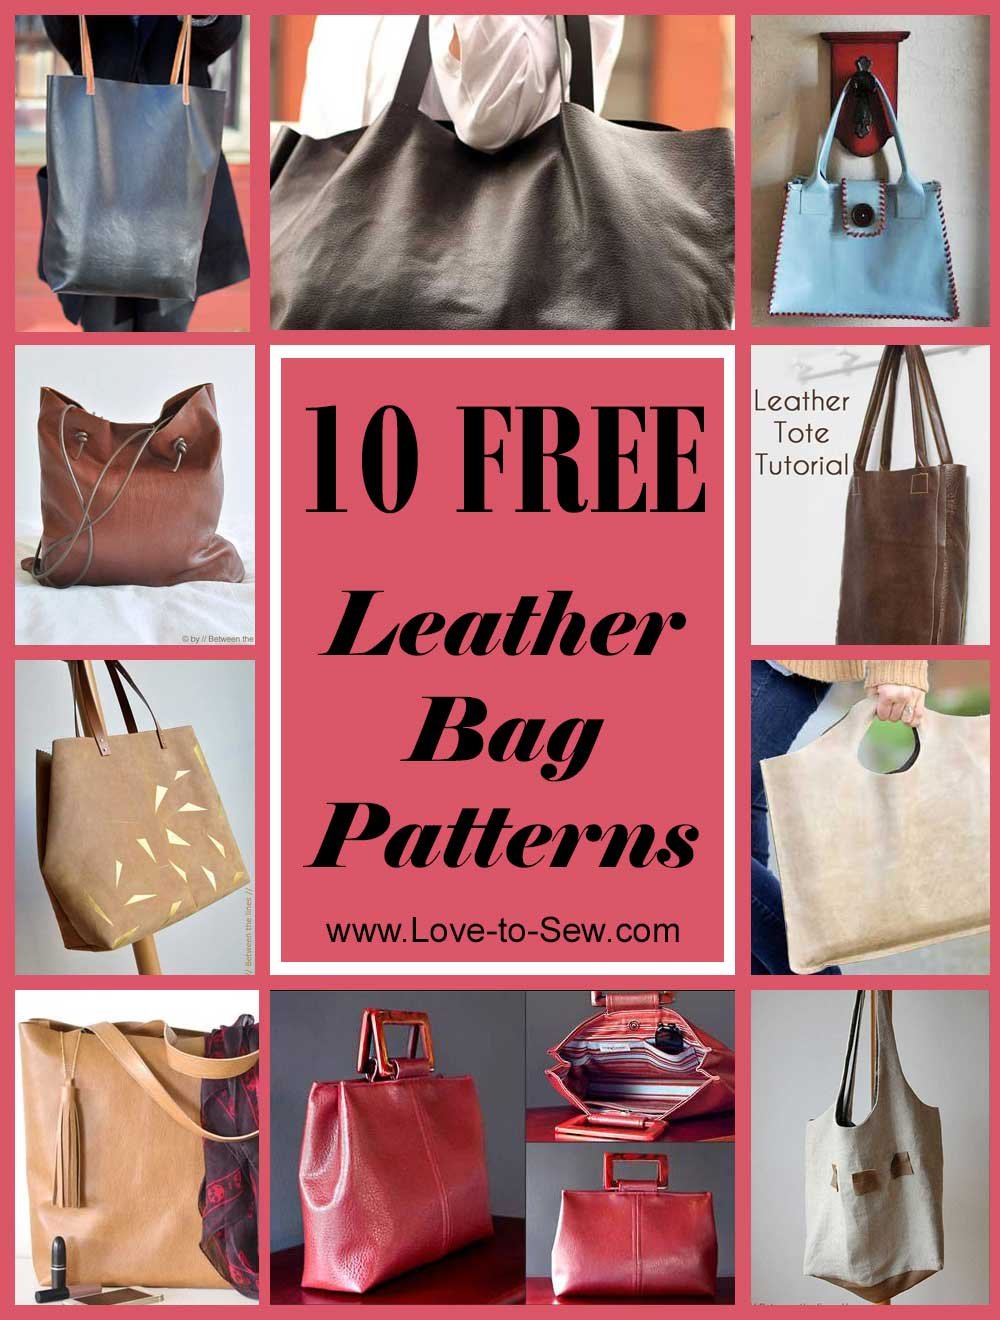 10-free-leather-bag-patterns-love-to-sew